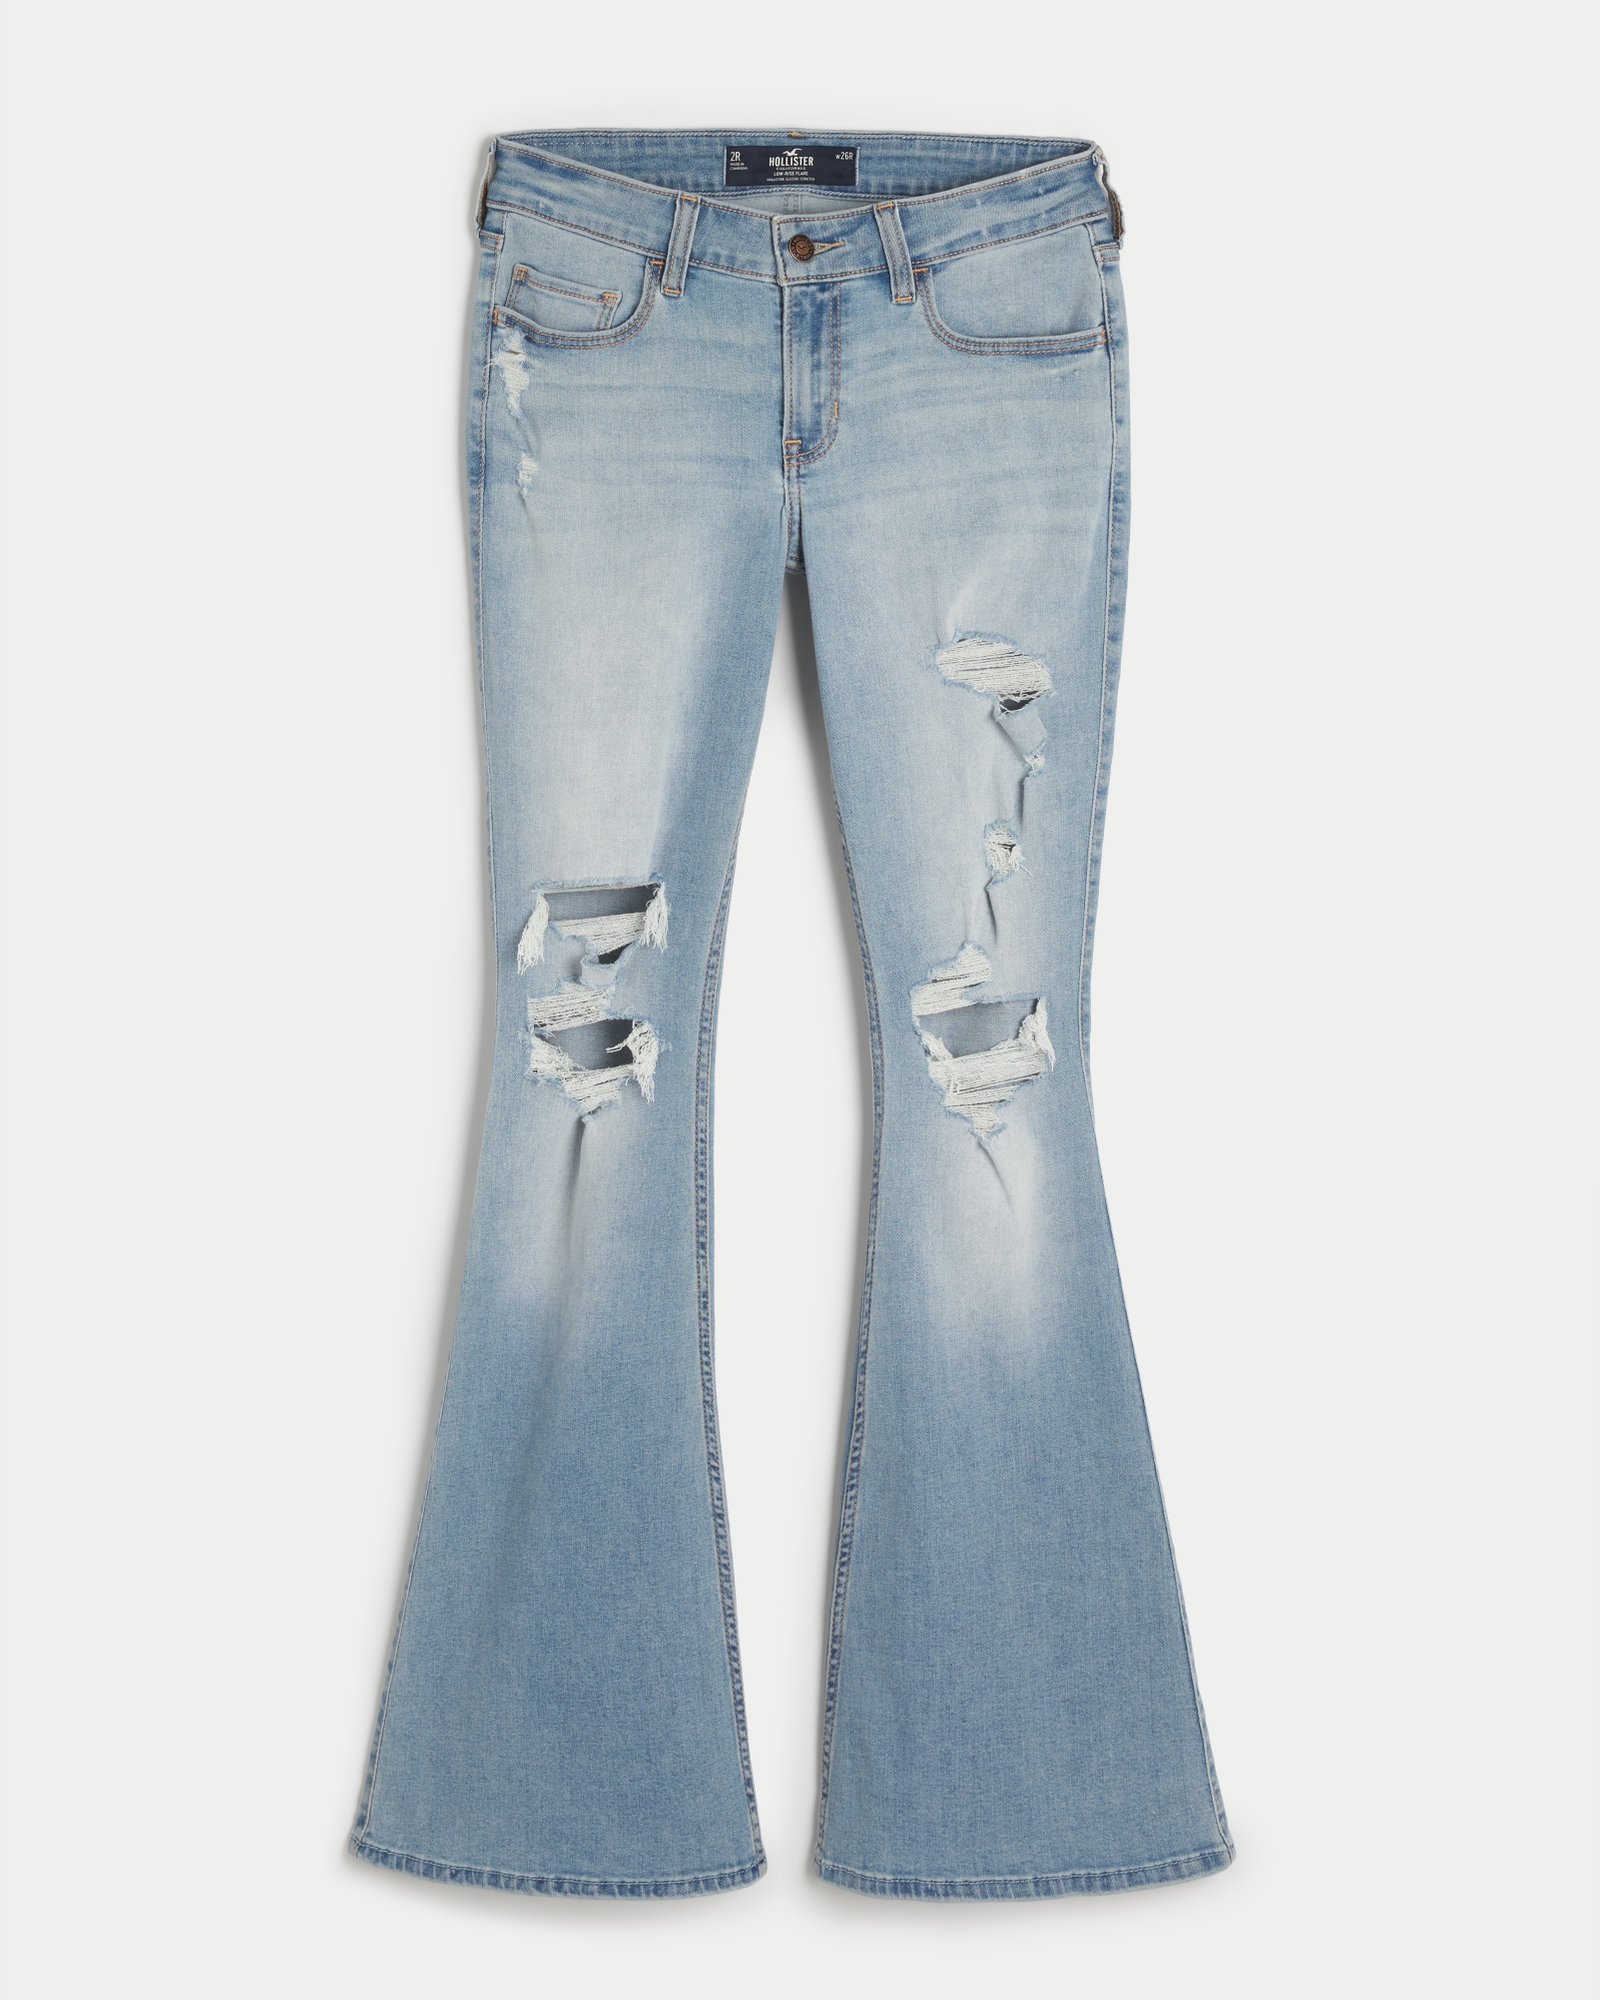 https://img.hollisterco.com/is/image/anf/KIC_355-4009-0024-281_prod1.jpg?policy=product-extra-large